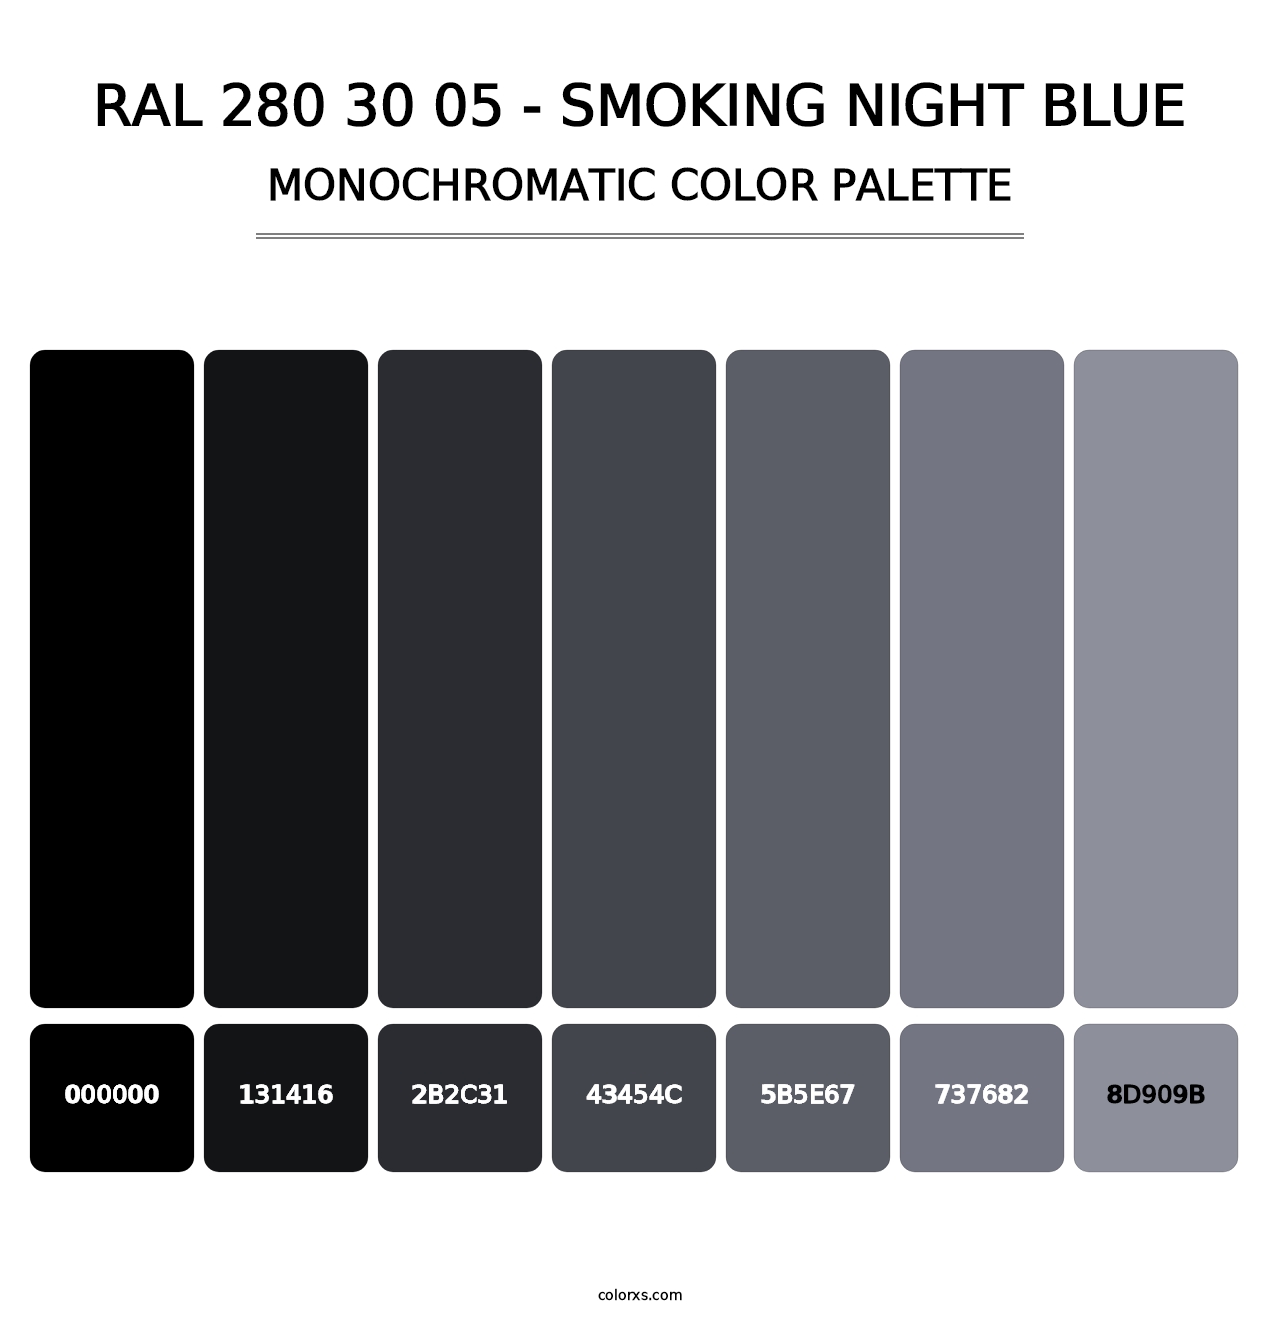 RAL 280 30 05 - Smoking Night Blue - Monochromatic Color Palette